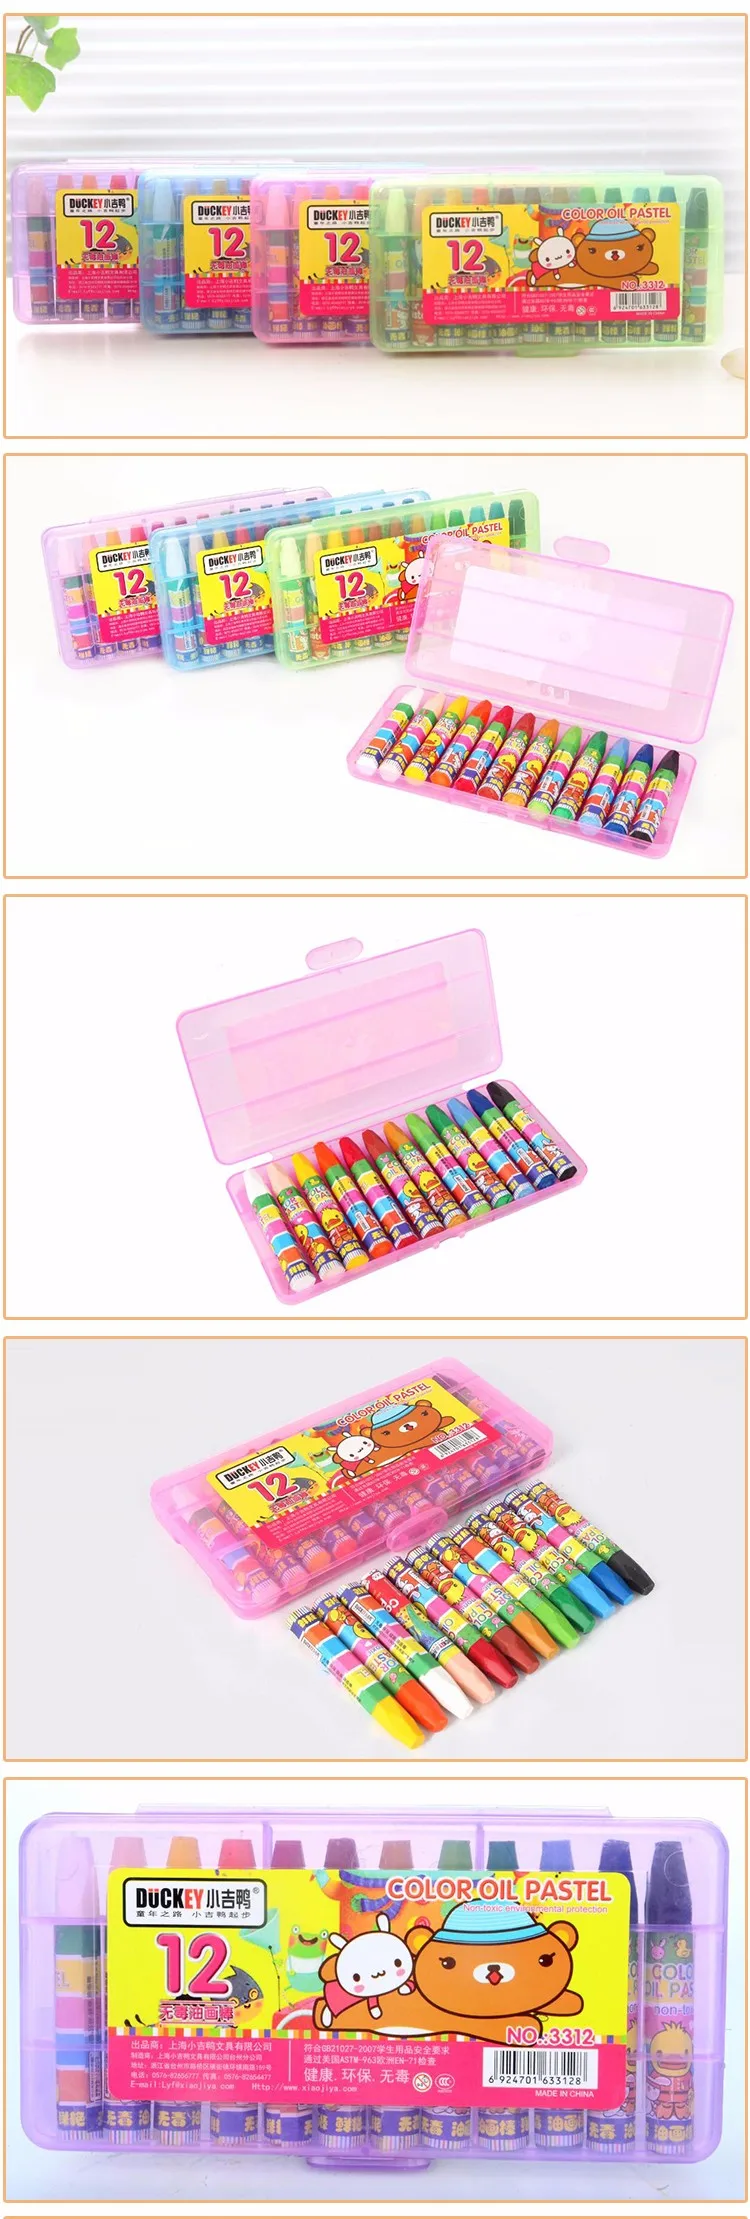 Colored Pencils Crayons in Bulk Environmental Protection High Quality Kids Oil Pastel Set 12colors CN;ZHE DUCKEY 3312 12